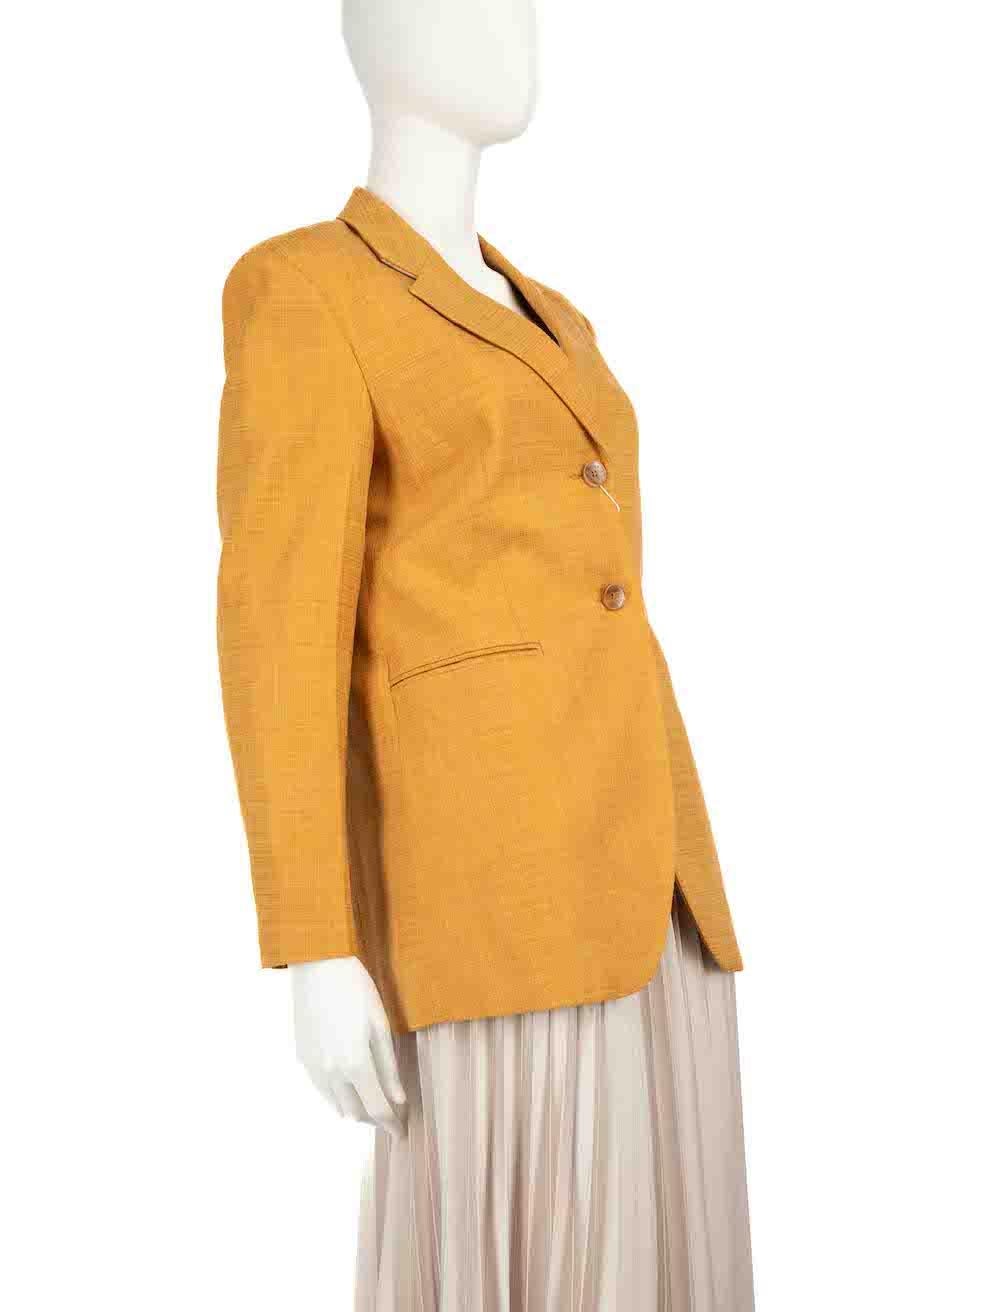 CONDITION is Never worn, with tags. No visible wear to blazer is evident on this new Sandro designer resale item.
 
 
 
 Details
 
 
 Mustard yellow
 
 Viscose
 
 Blazer
 
 Shoulder pads
 
 Long sleeves
 
 Mid length
 
 Single breasted
 
 Button up